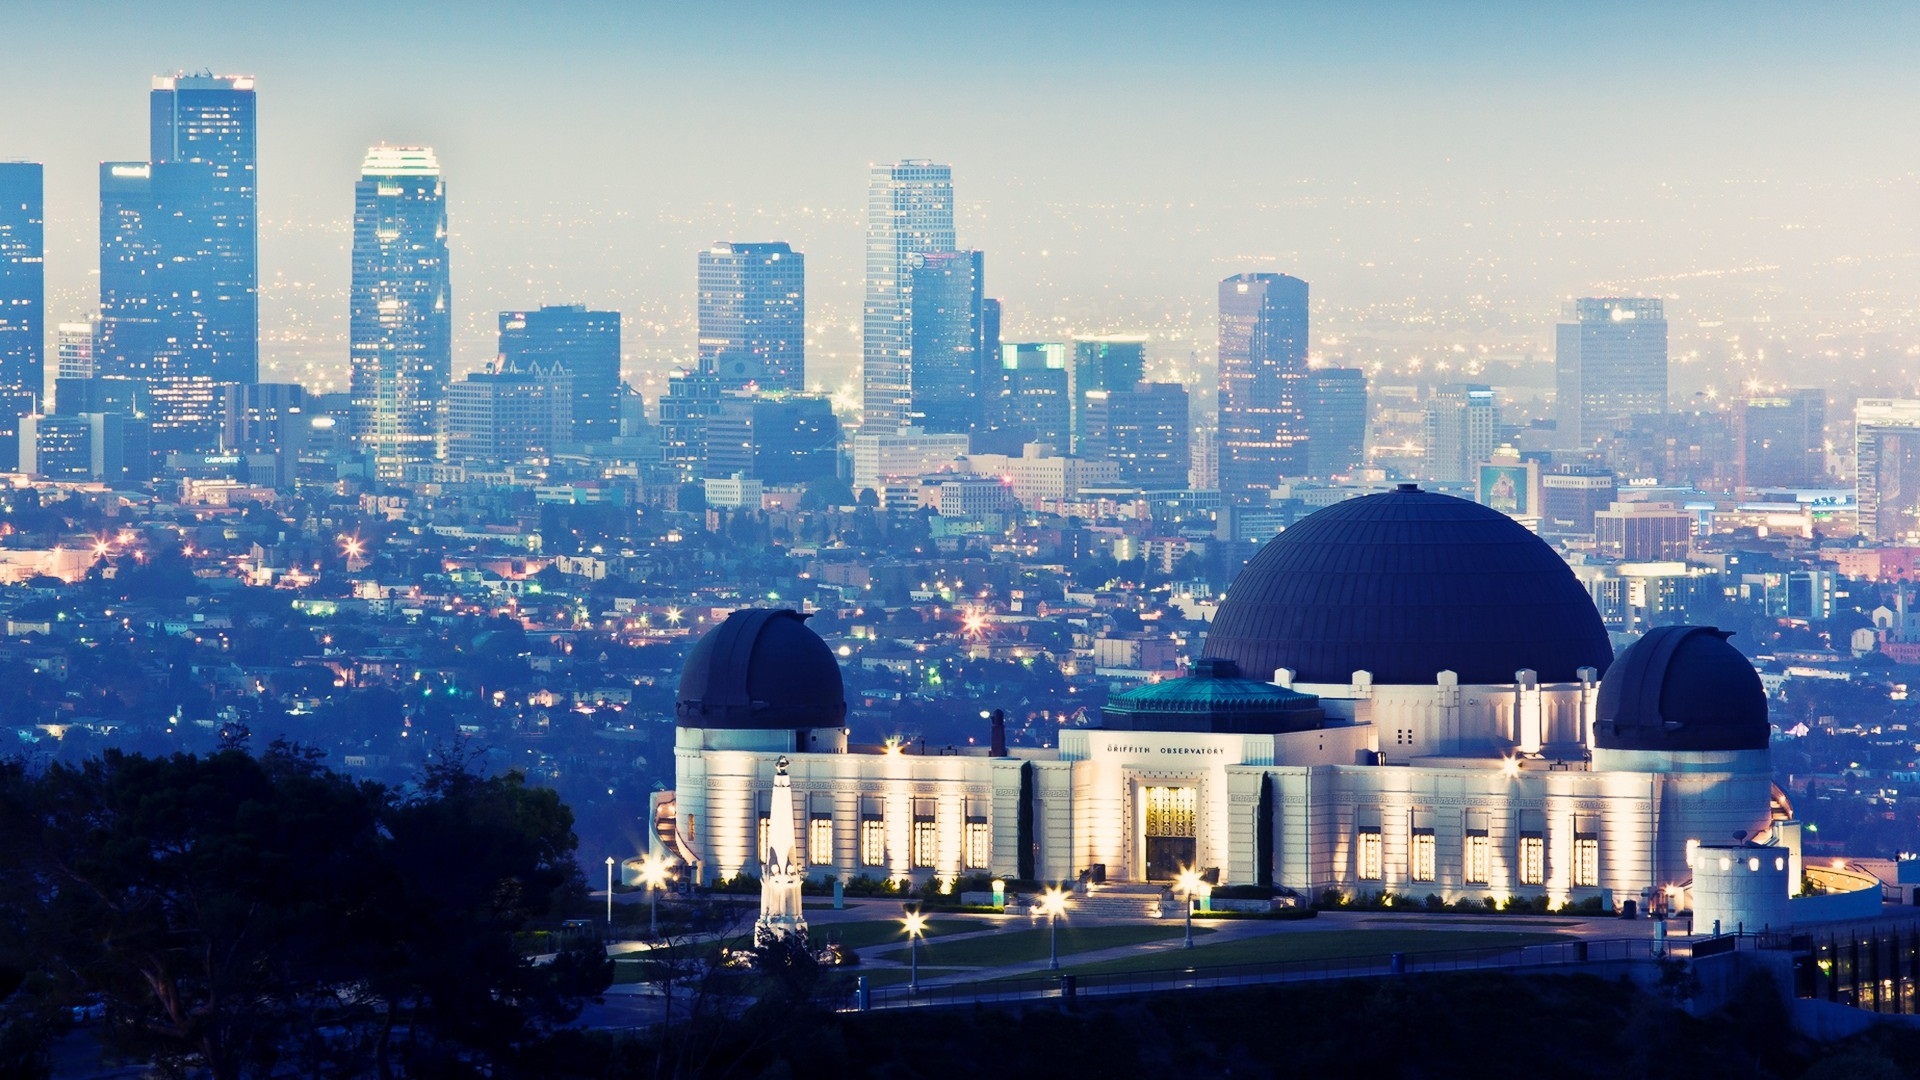 Wallpaper Griffith Observatory, skyscrapers, night, lights, Los Angeles, USA 1920x1200 HD Picture, Image